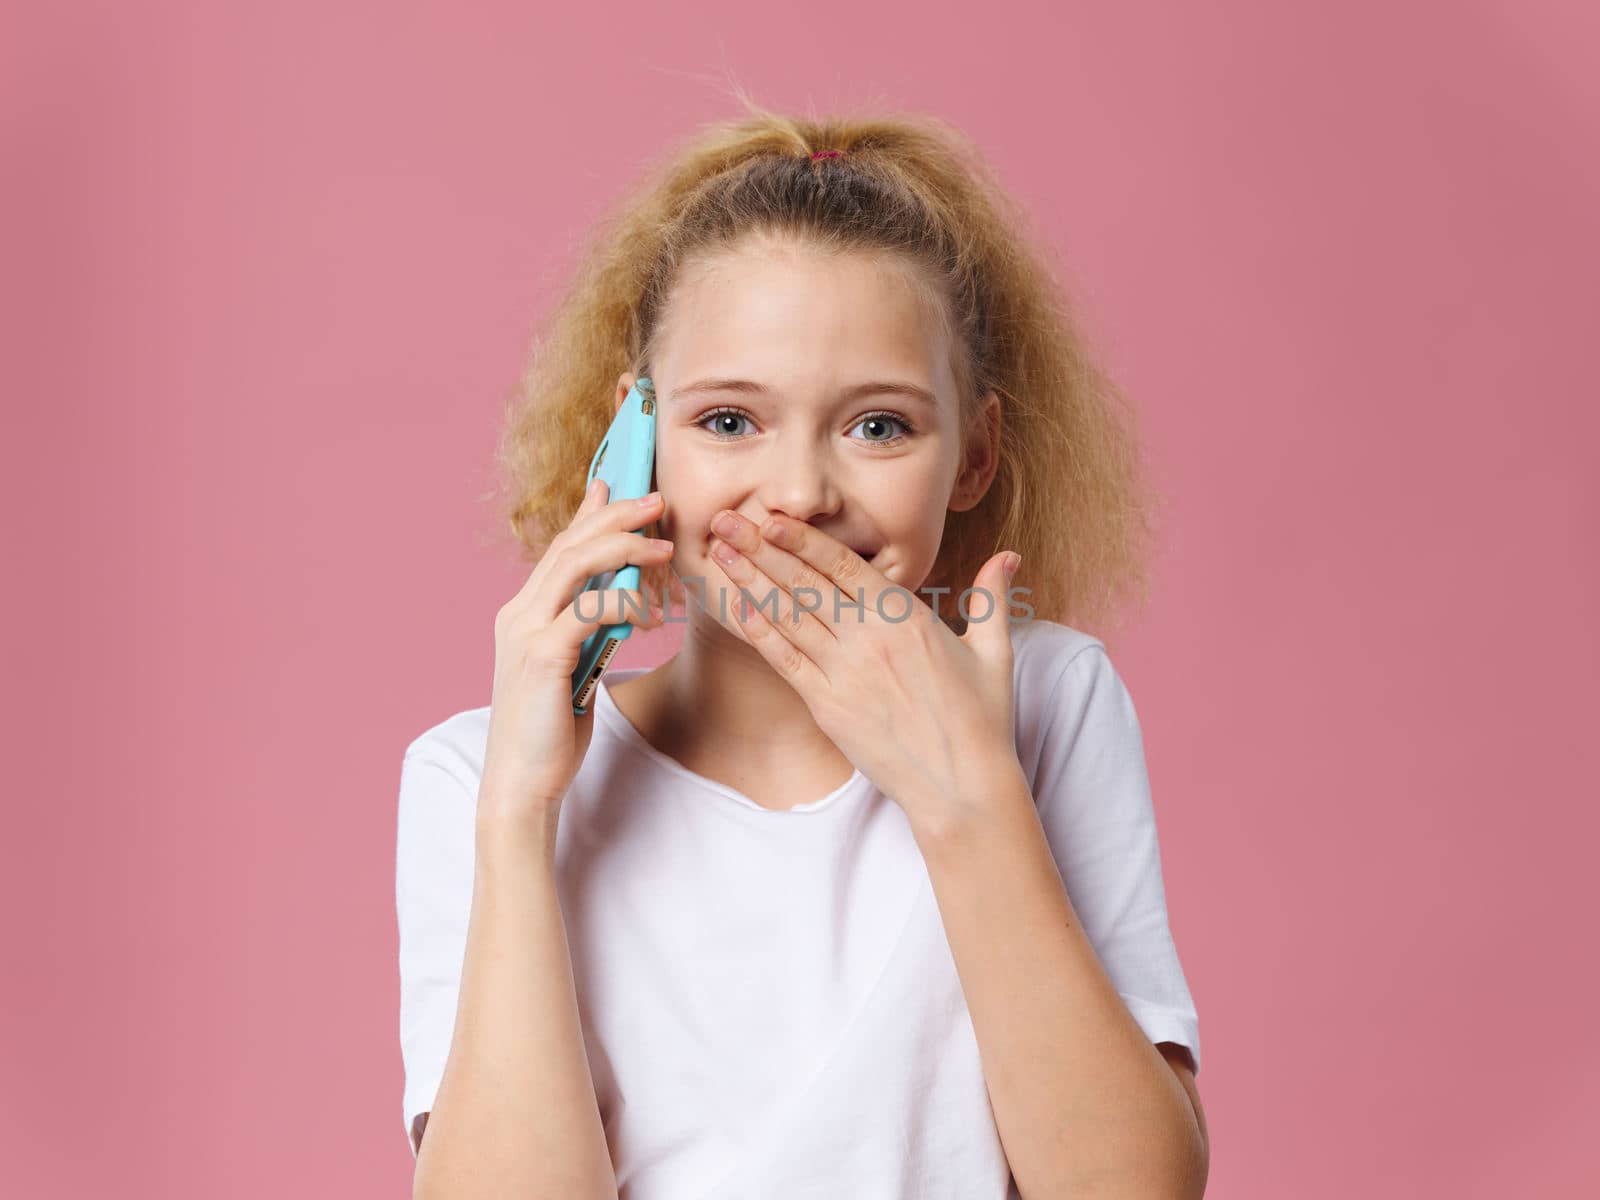 Girl talking on the phone well secret white t-shirt pink isolated background smile